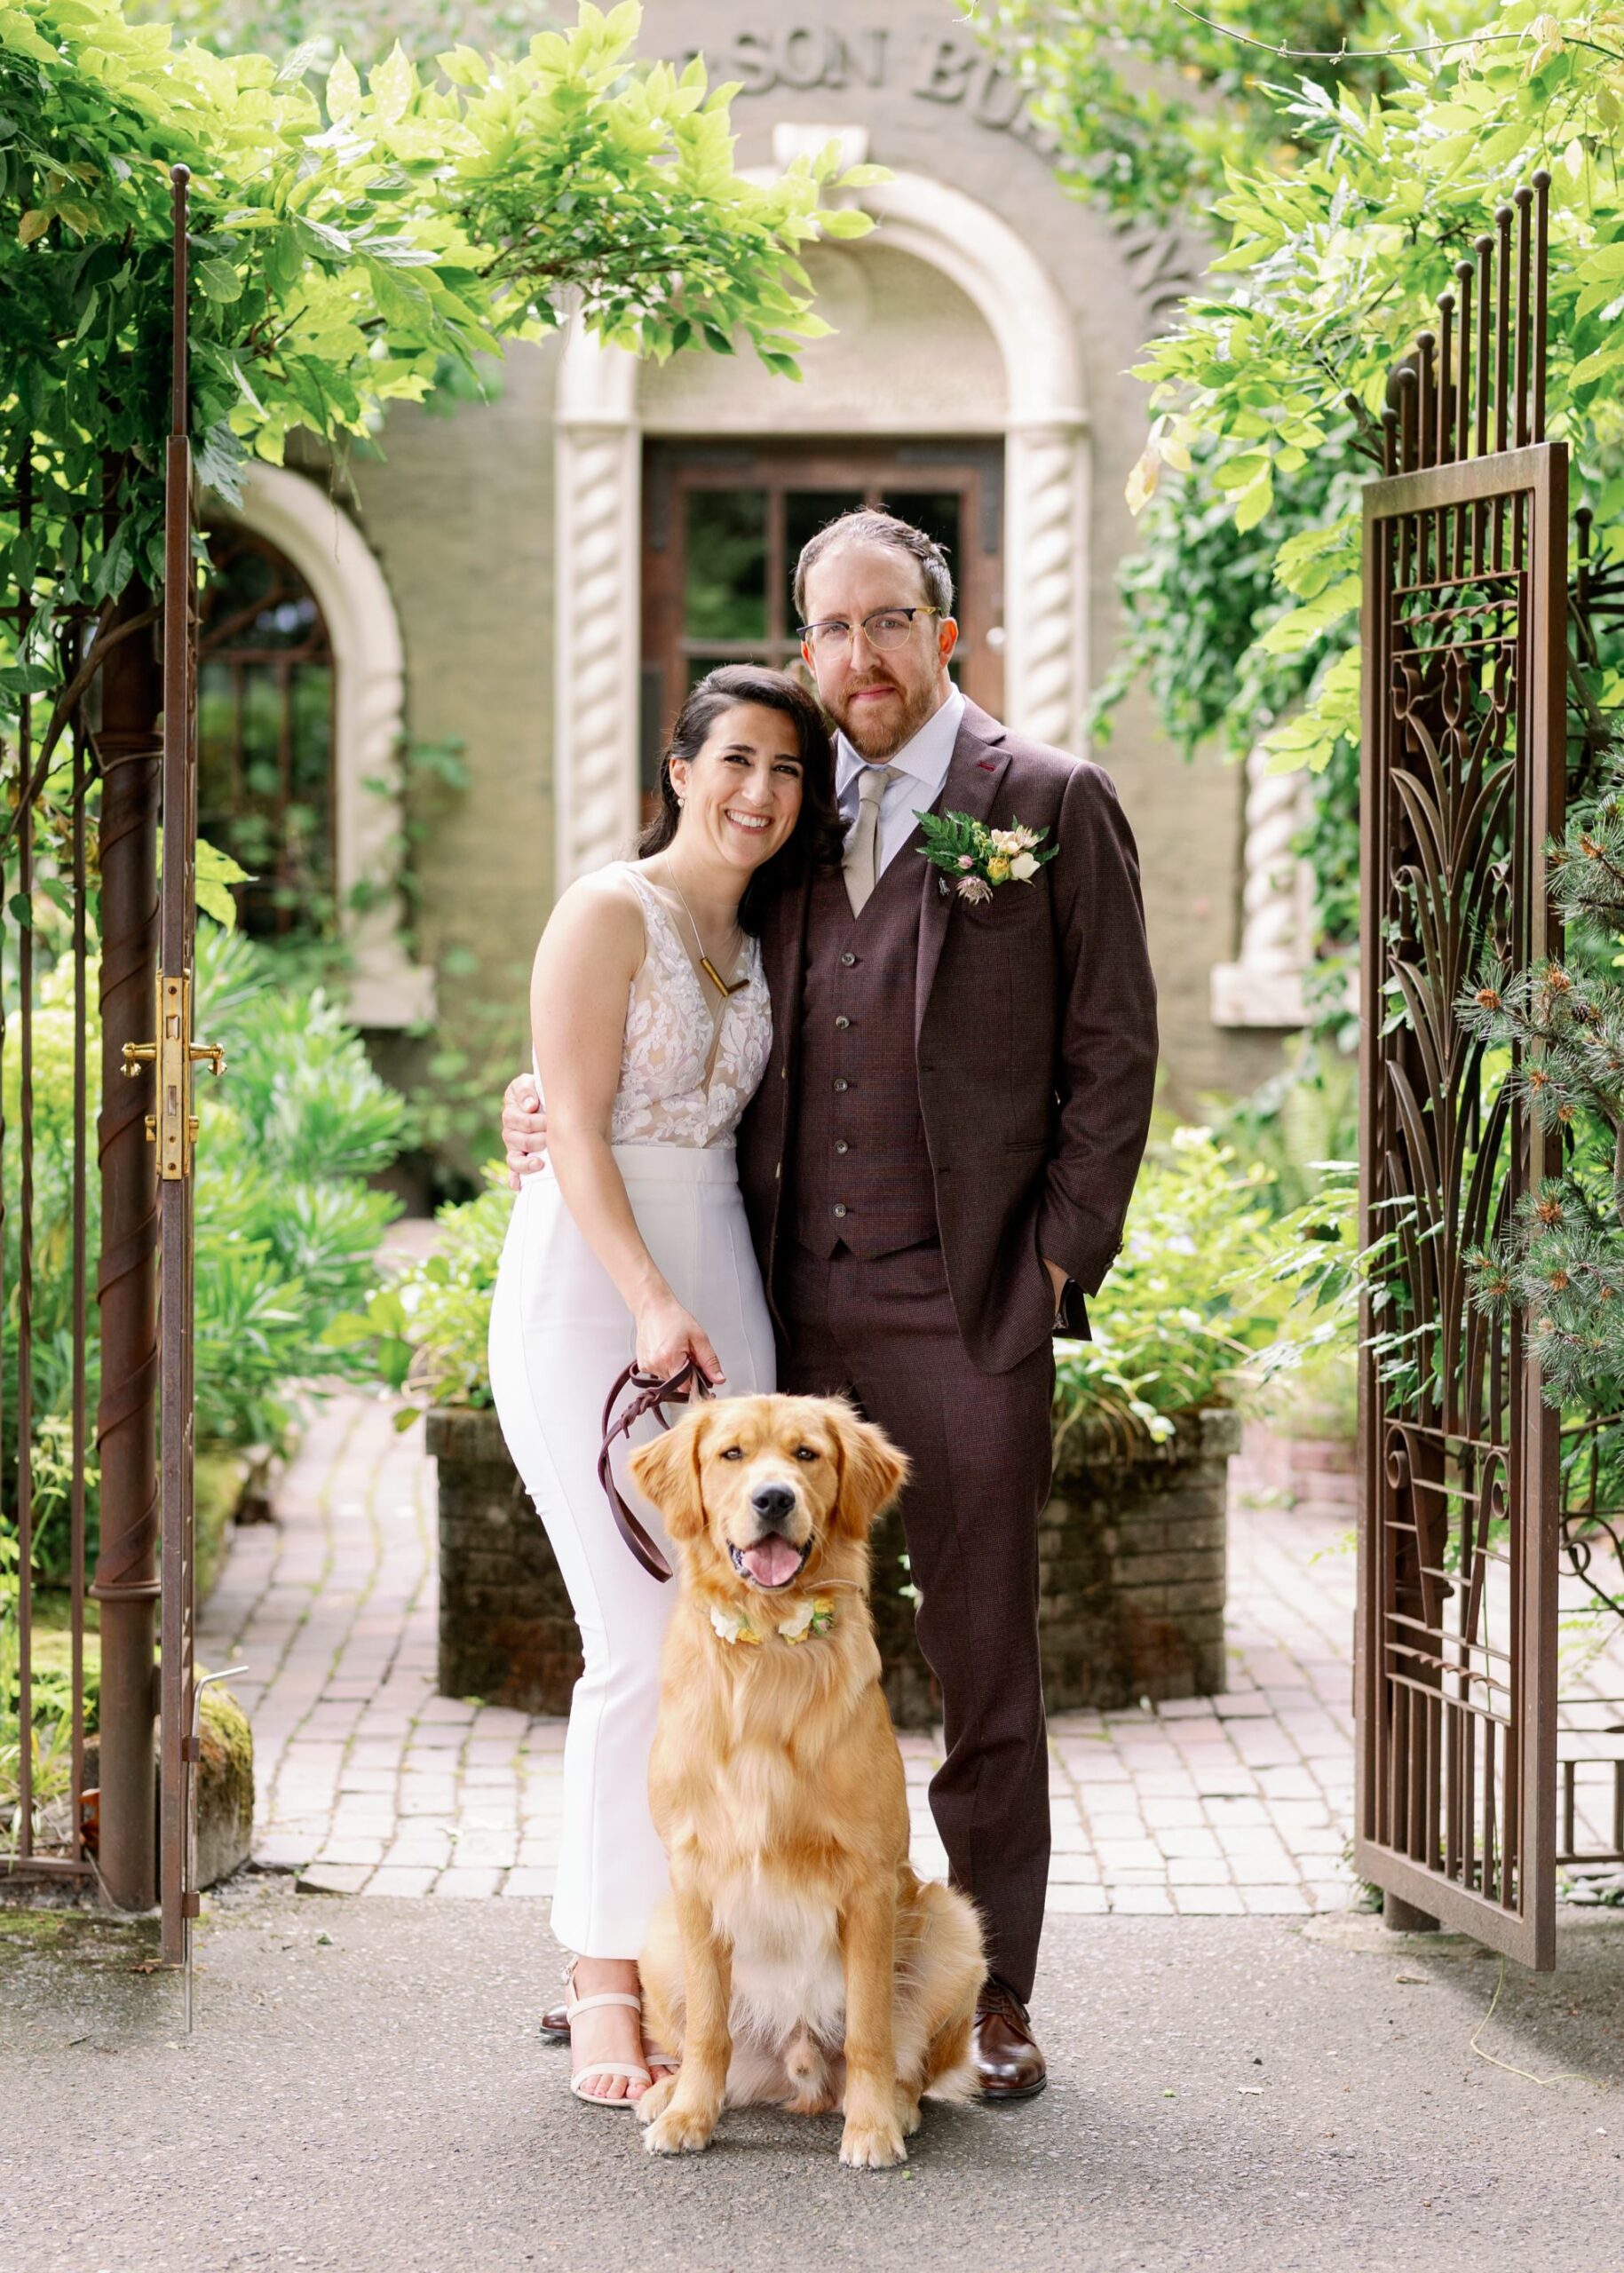 A bride and groom pose with their golden retriever in front of The Corson Building, a restaurant and wedding venue in Seattle.